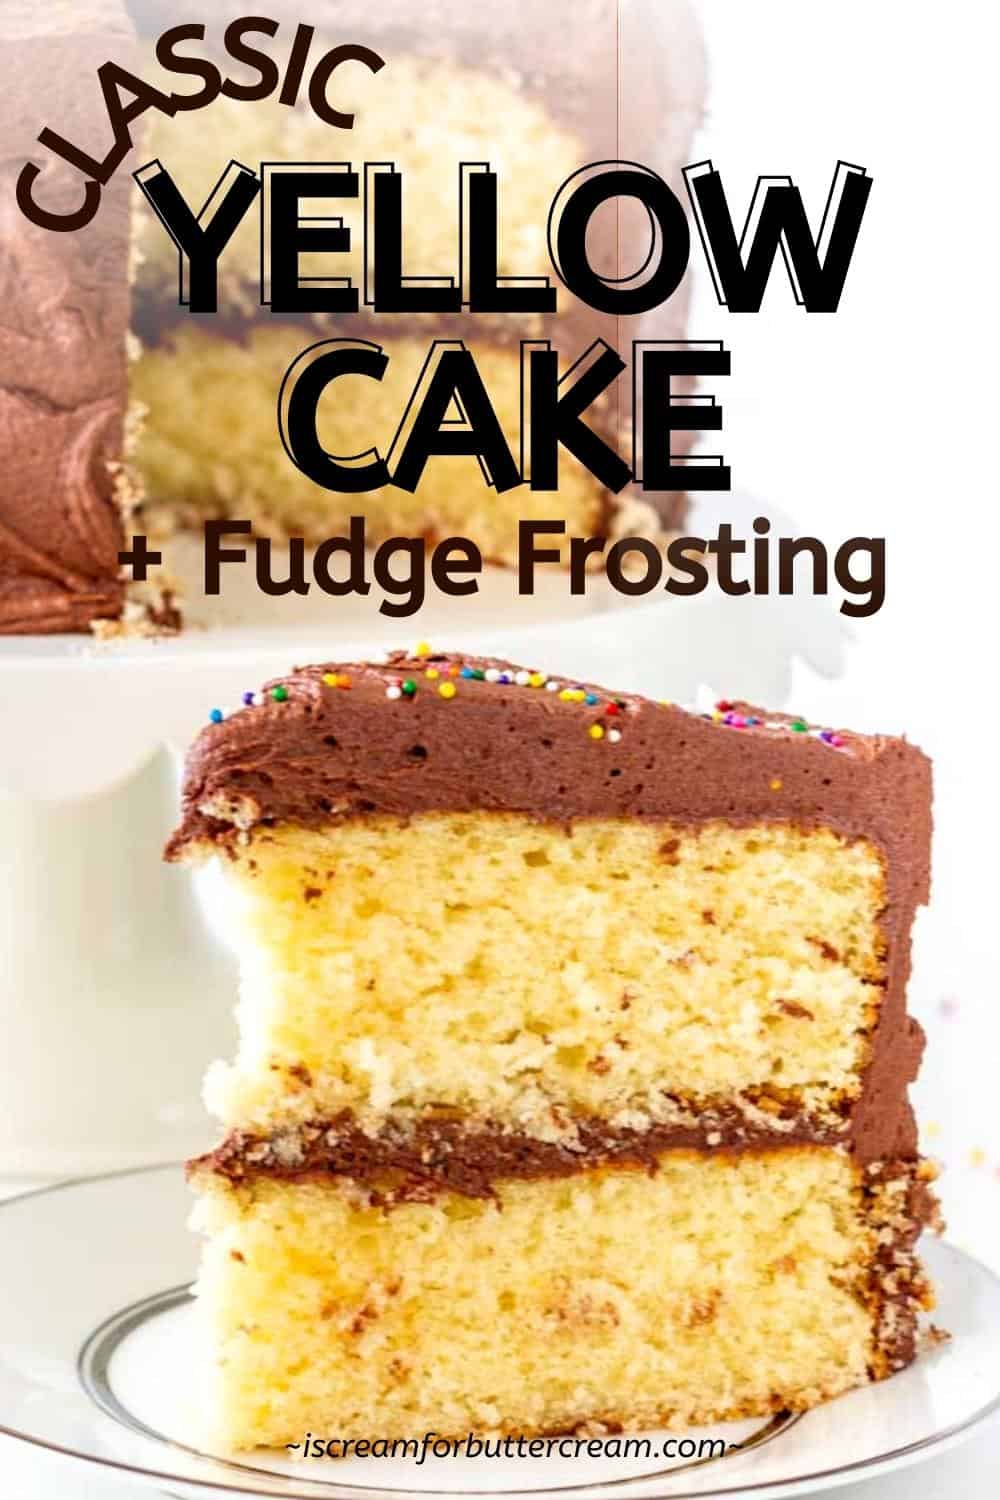 Classic yellow cake slice with text overlay.